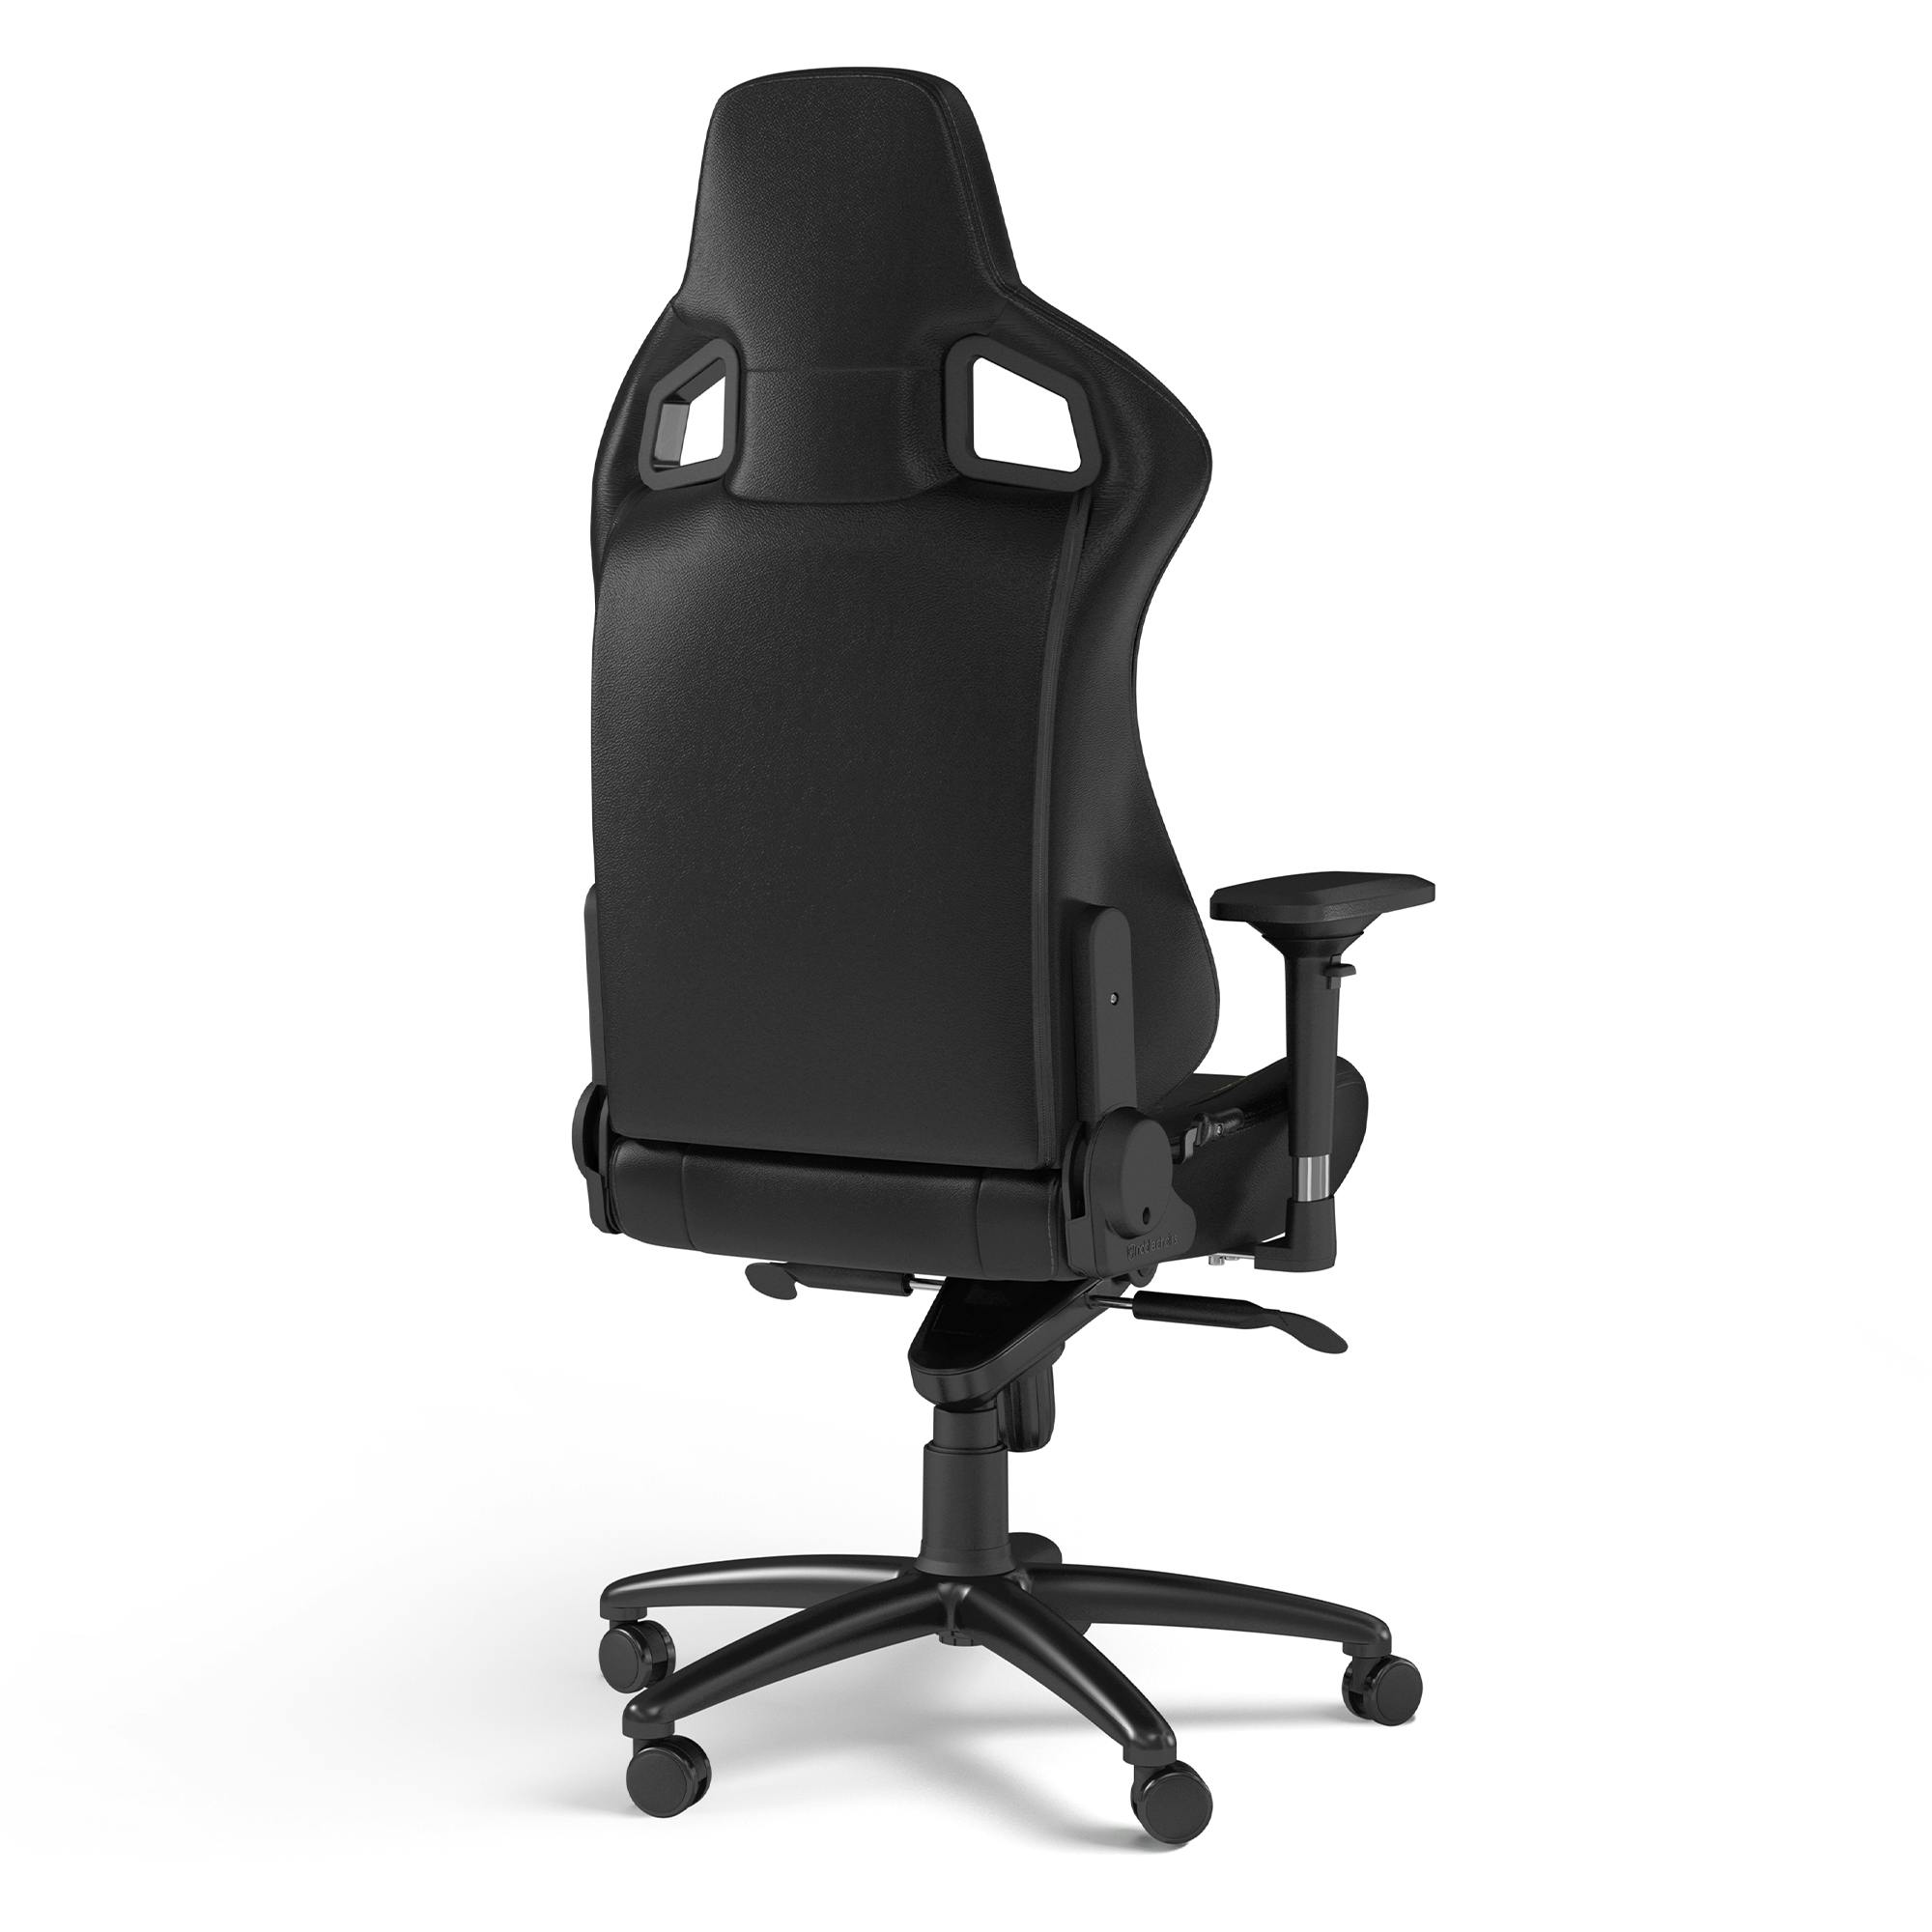 noblechairs - EPIC Real Leather Preto